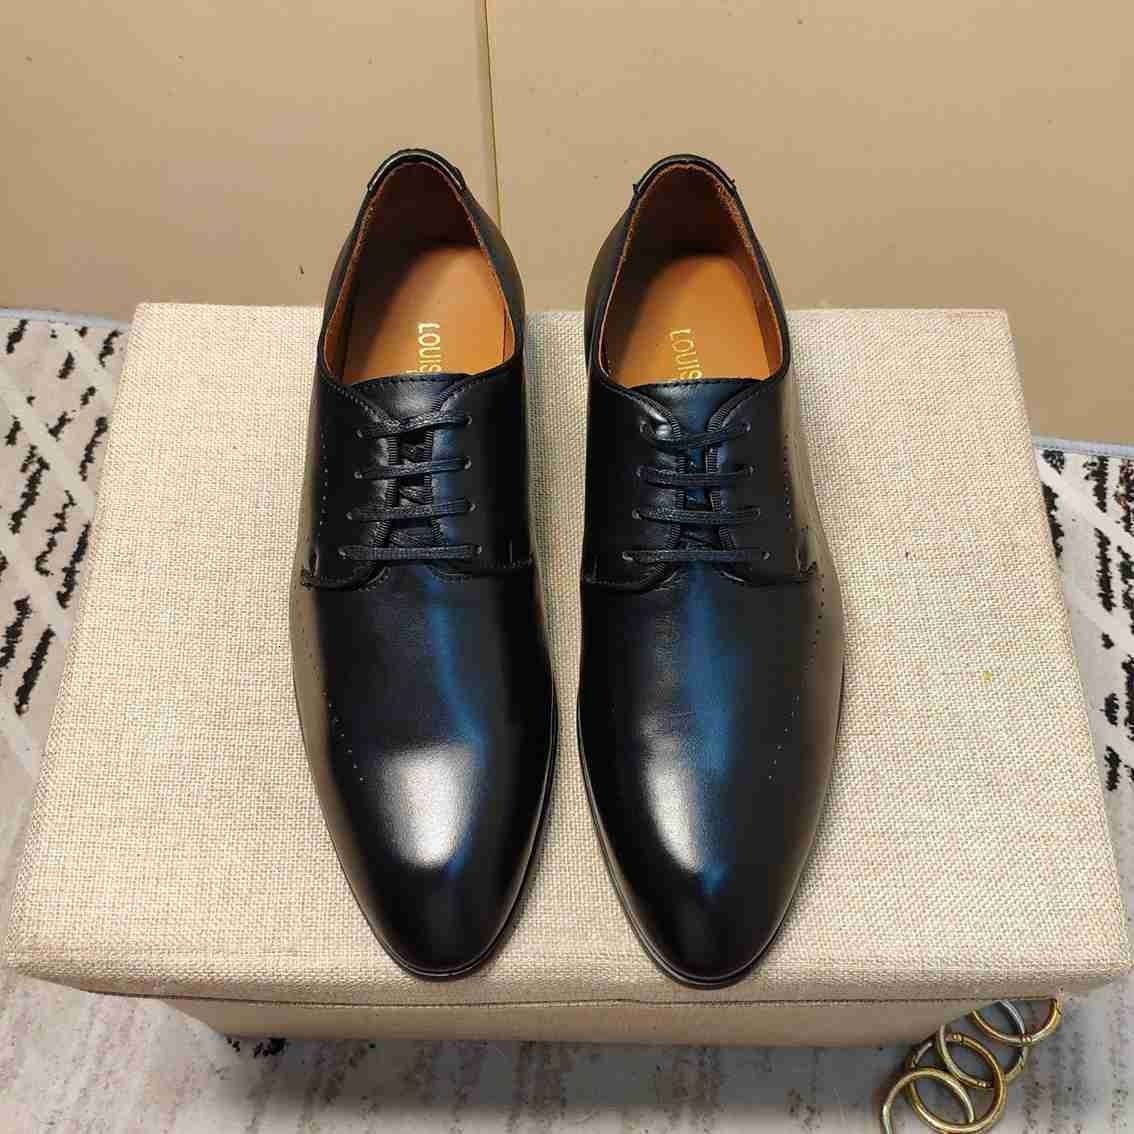 flat sole formal leather shoes